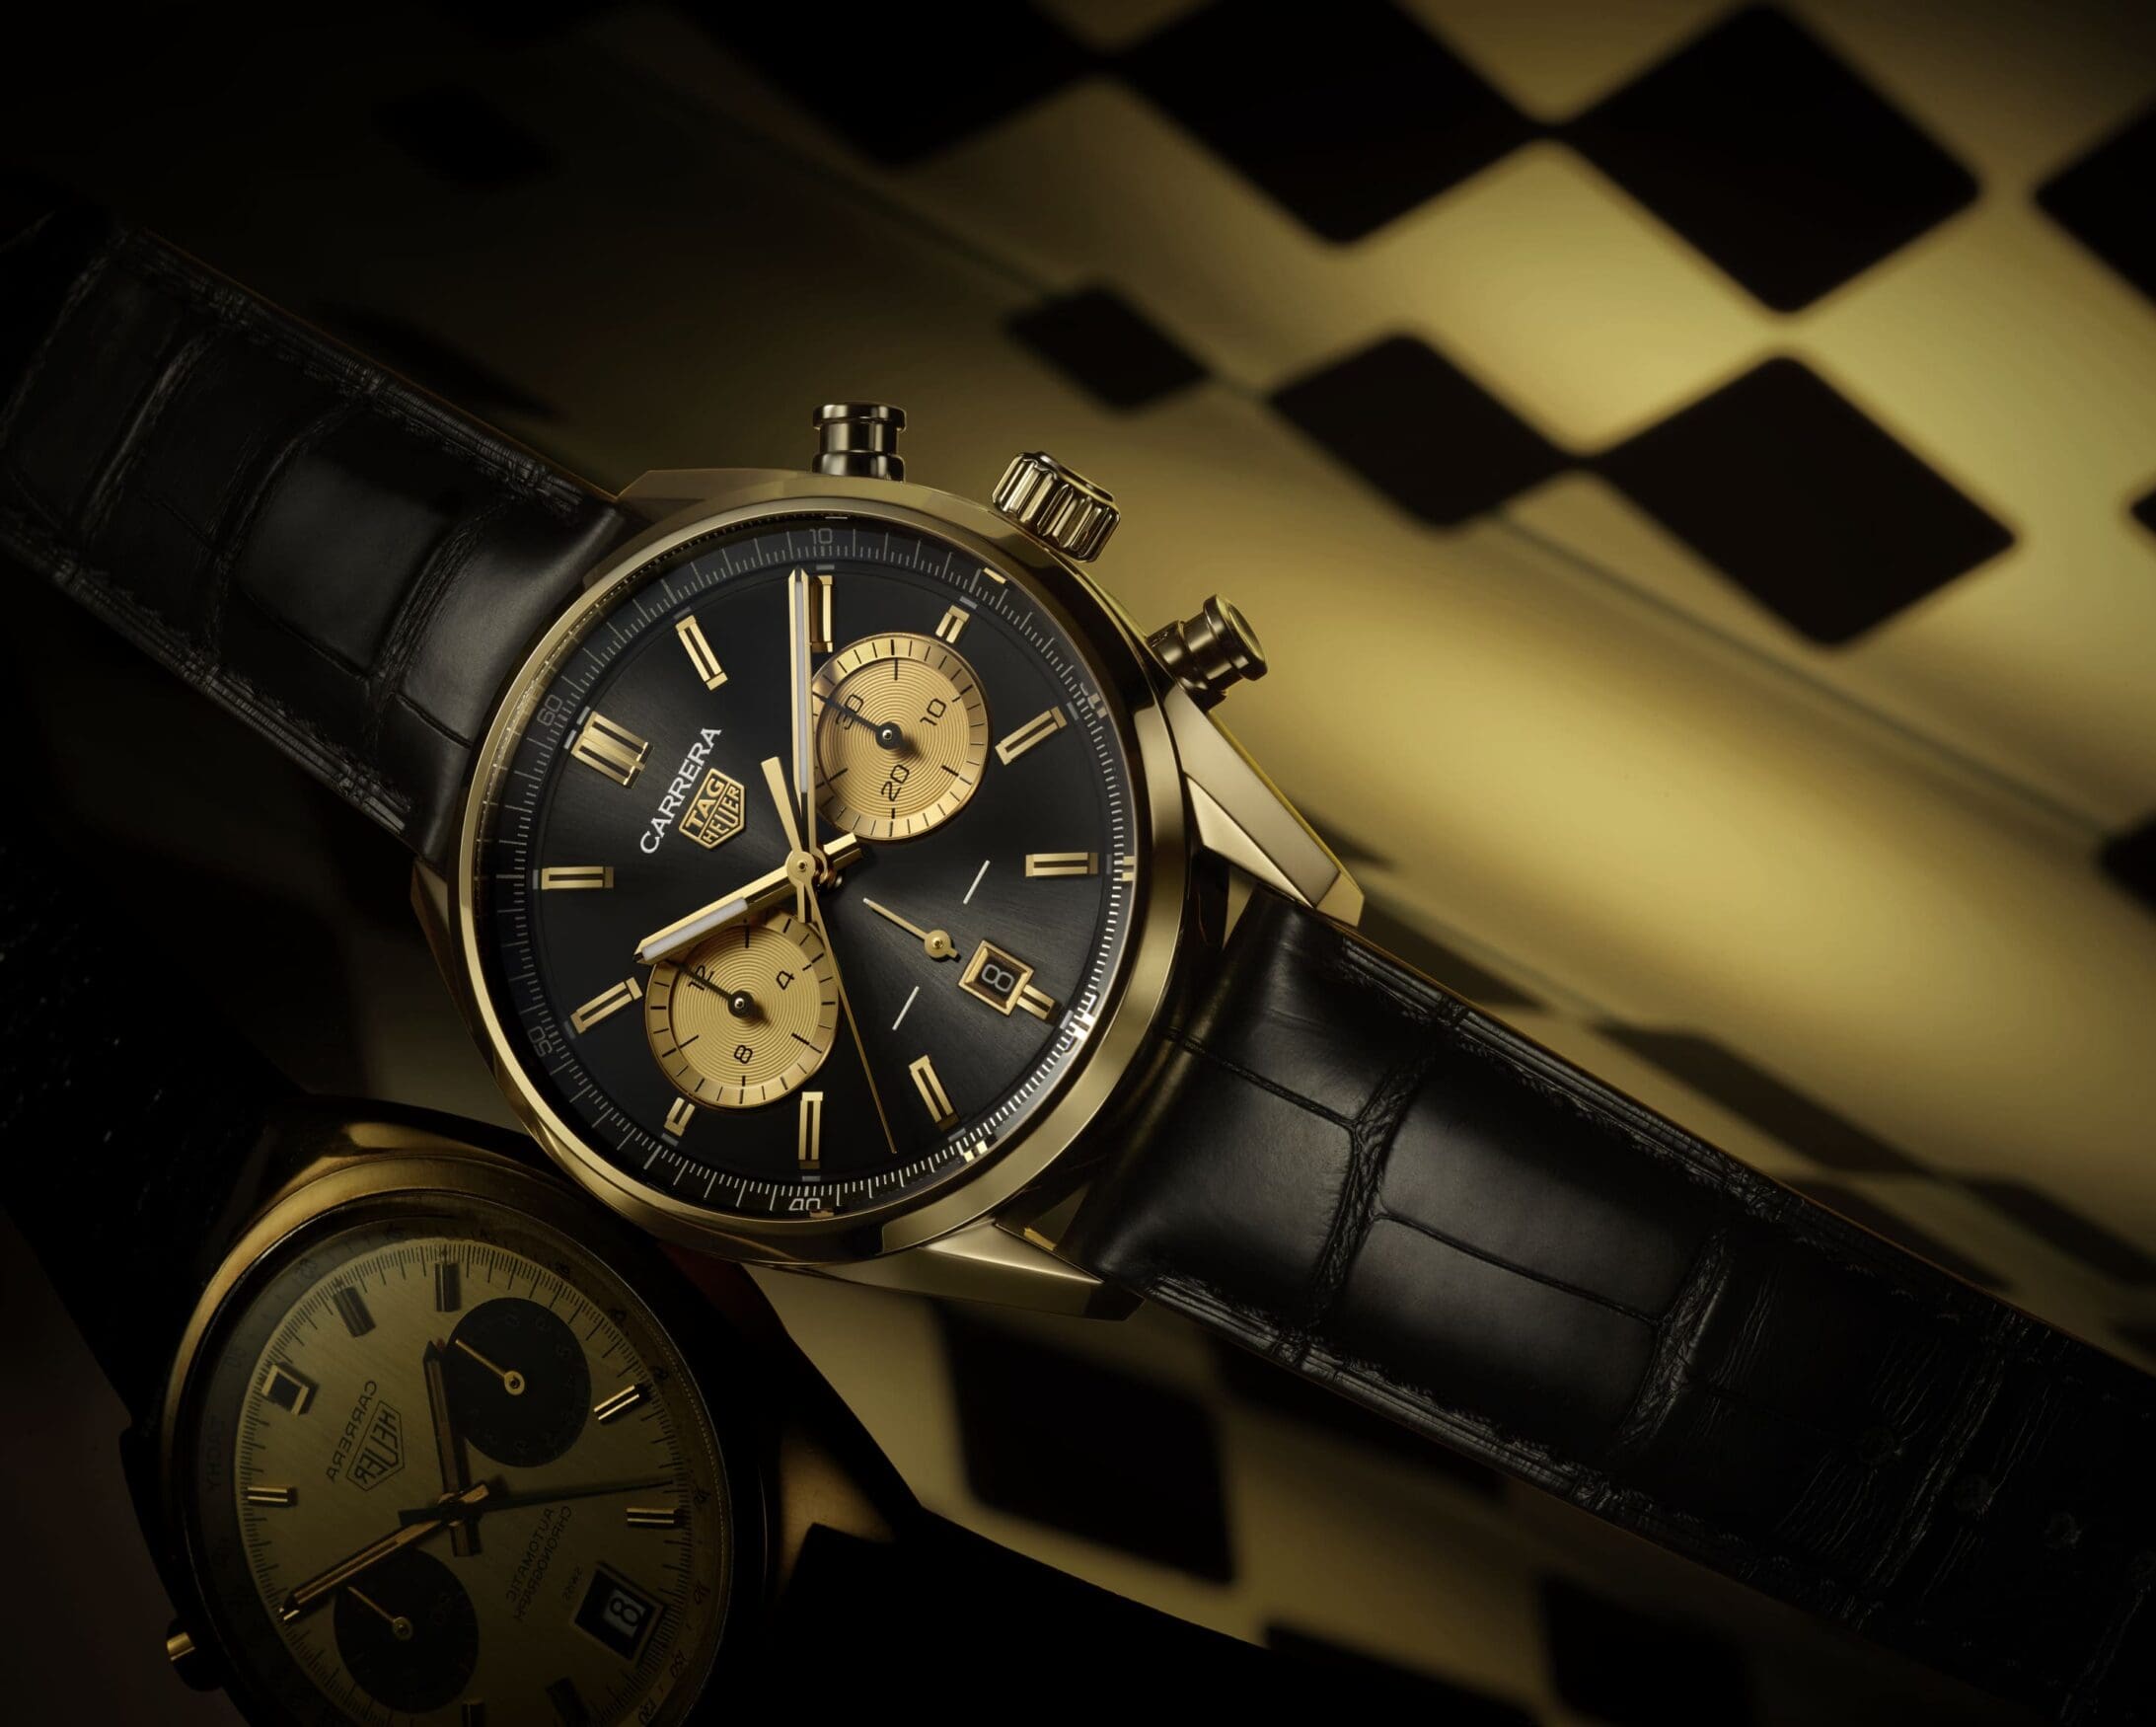 The new TAG Heuer Carrera in yellow gold is a gentleman’s racing chrono